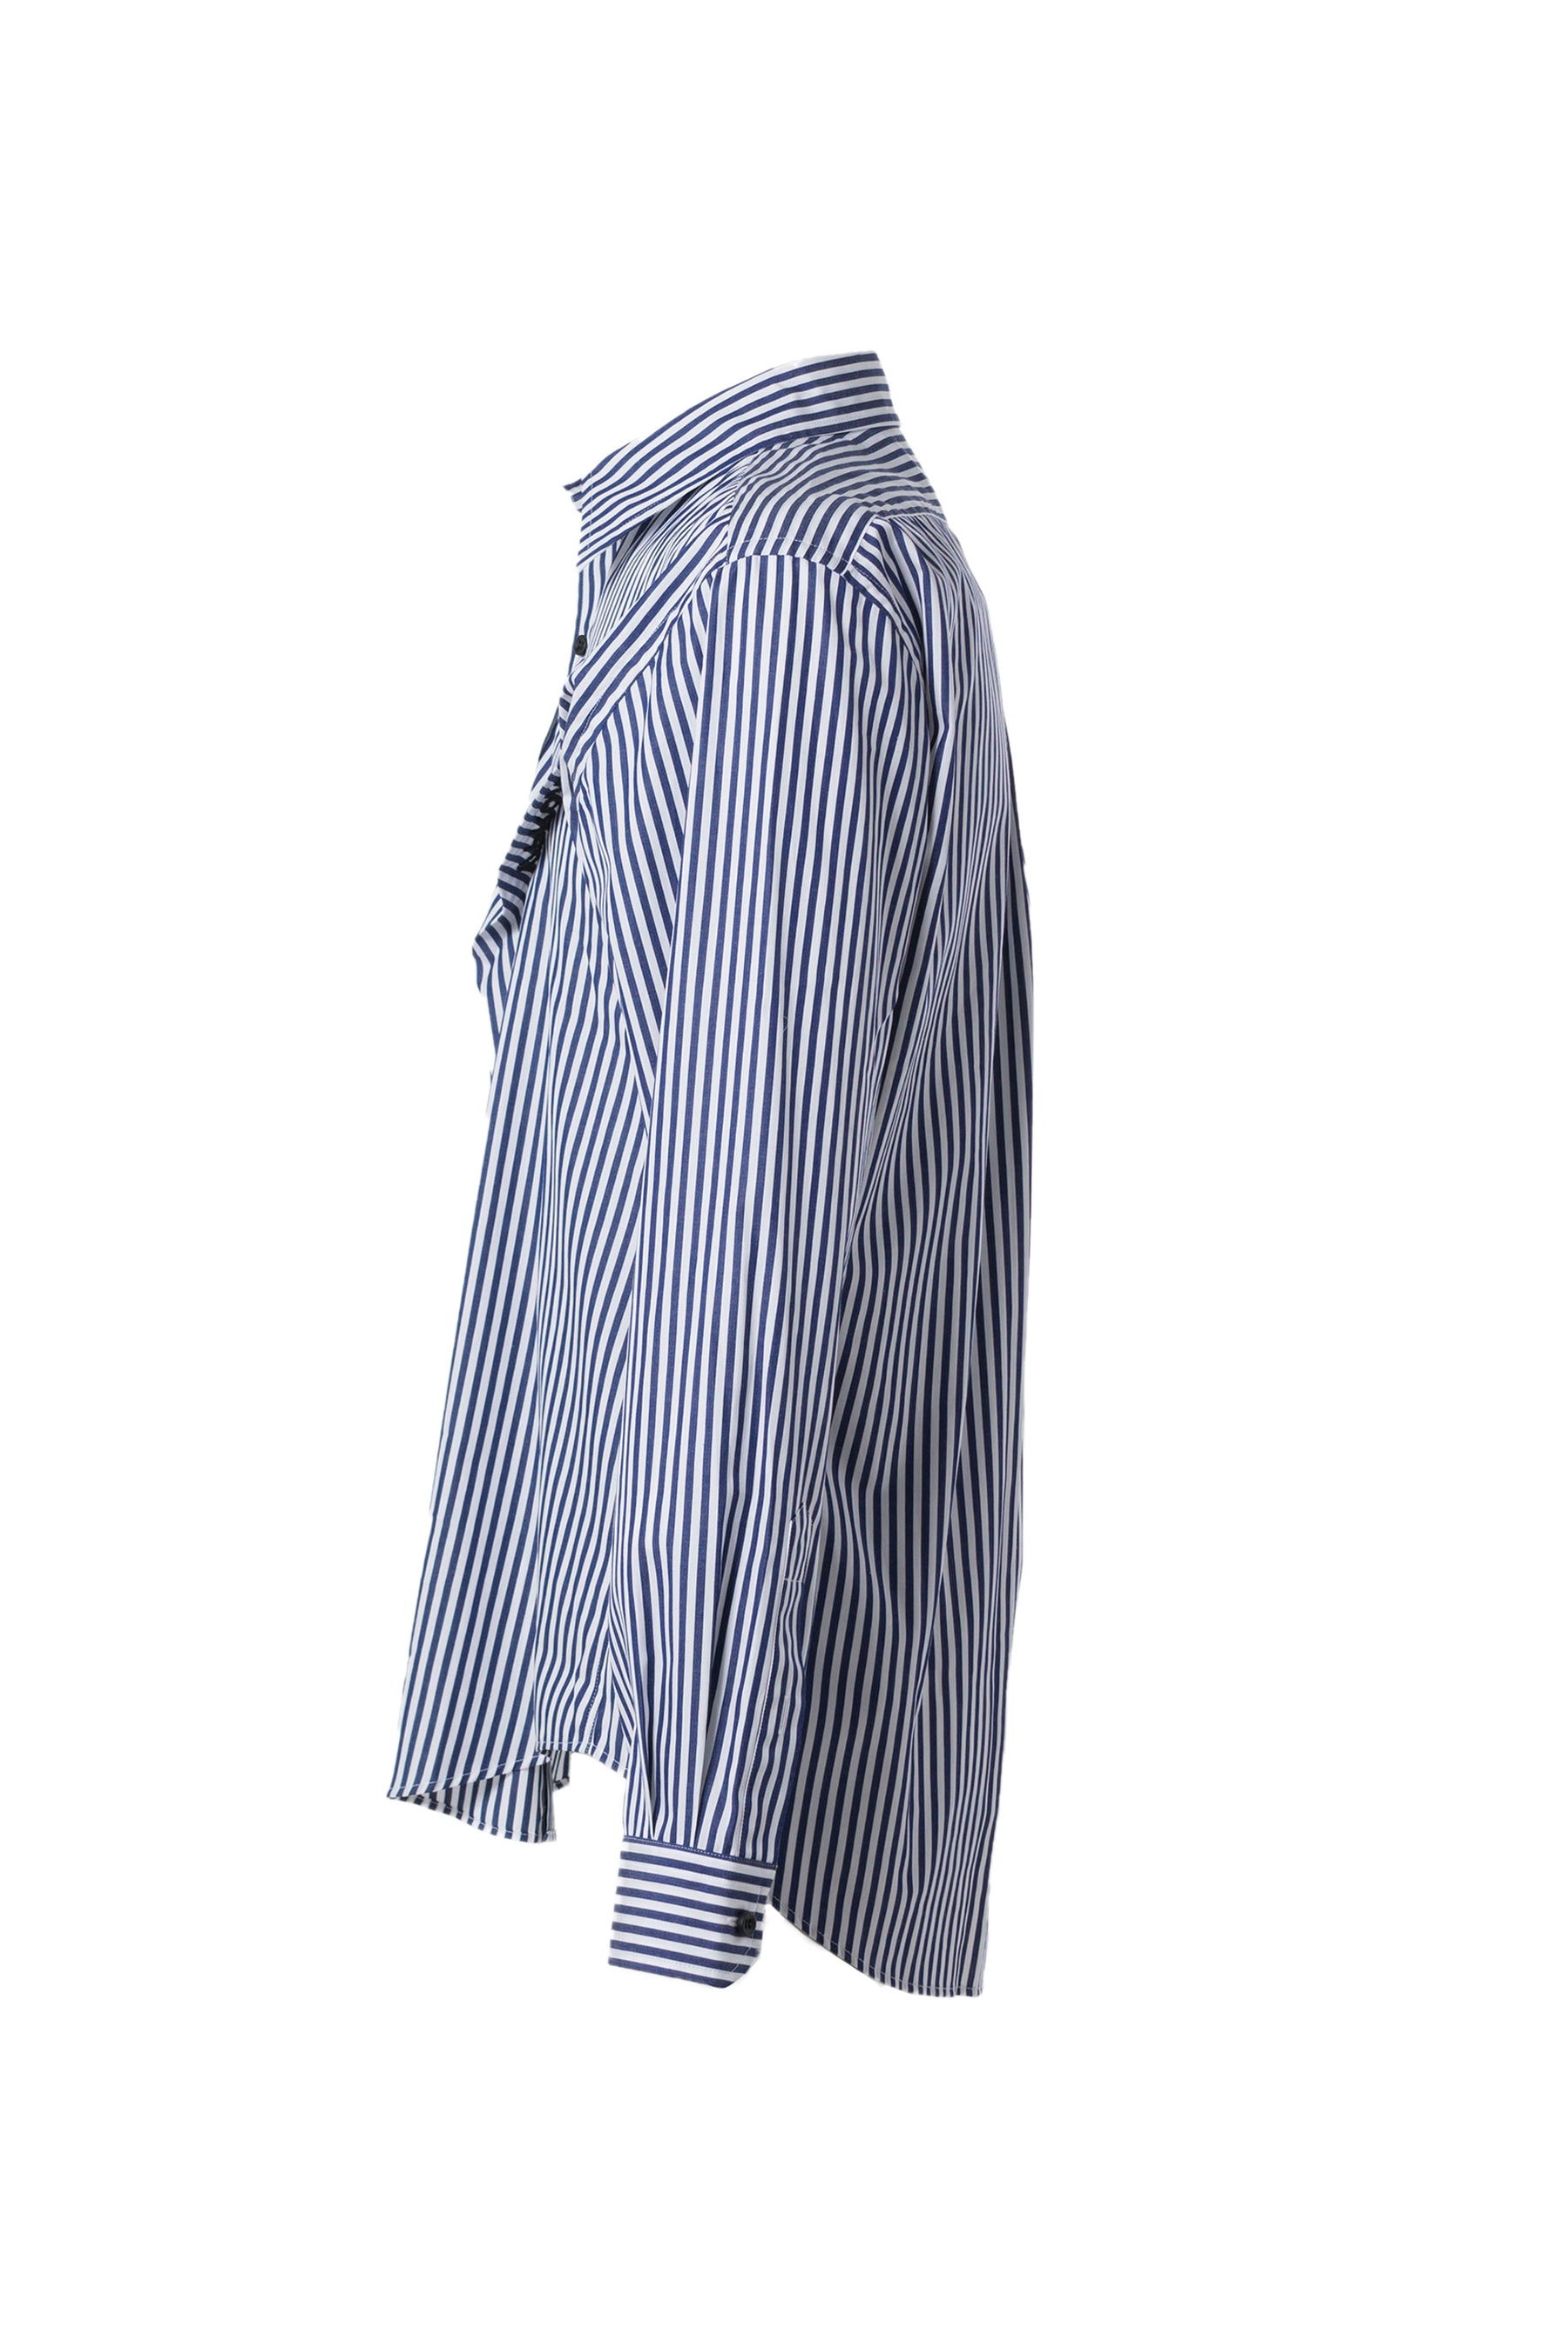 Y/PROJECT PINCHED LOGO STRIPE SHIRT / NVY/WHT